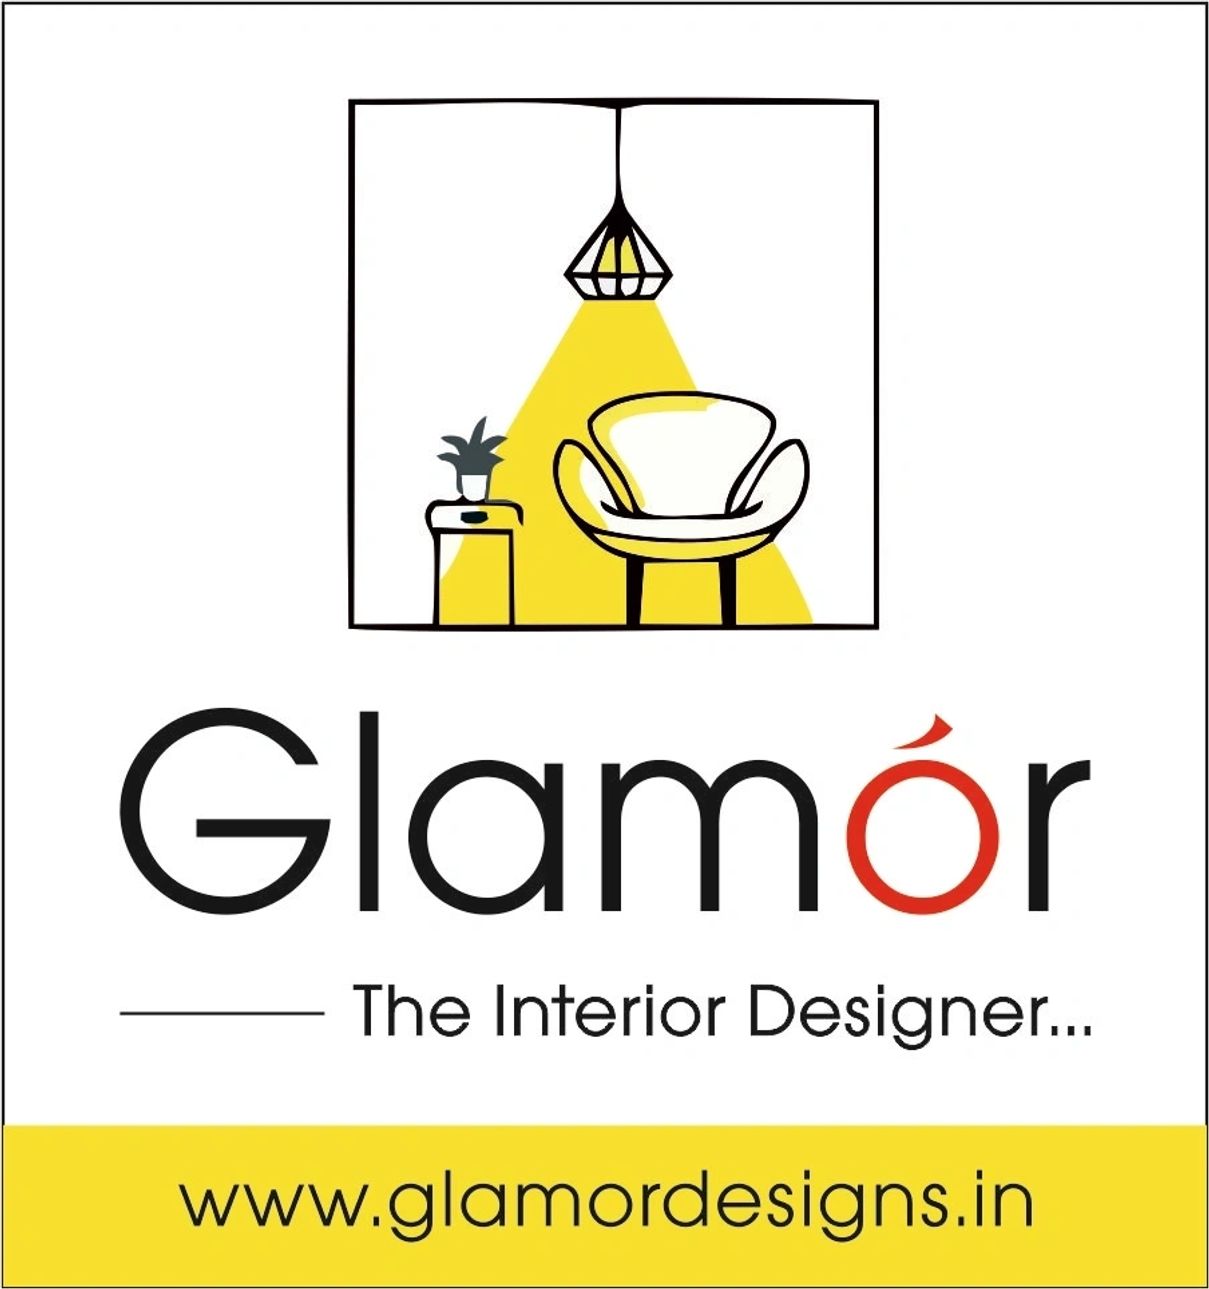 GLAMOR The Interior Designers|Legal Services|Professional Services